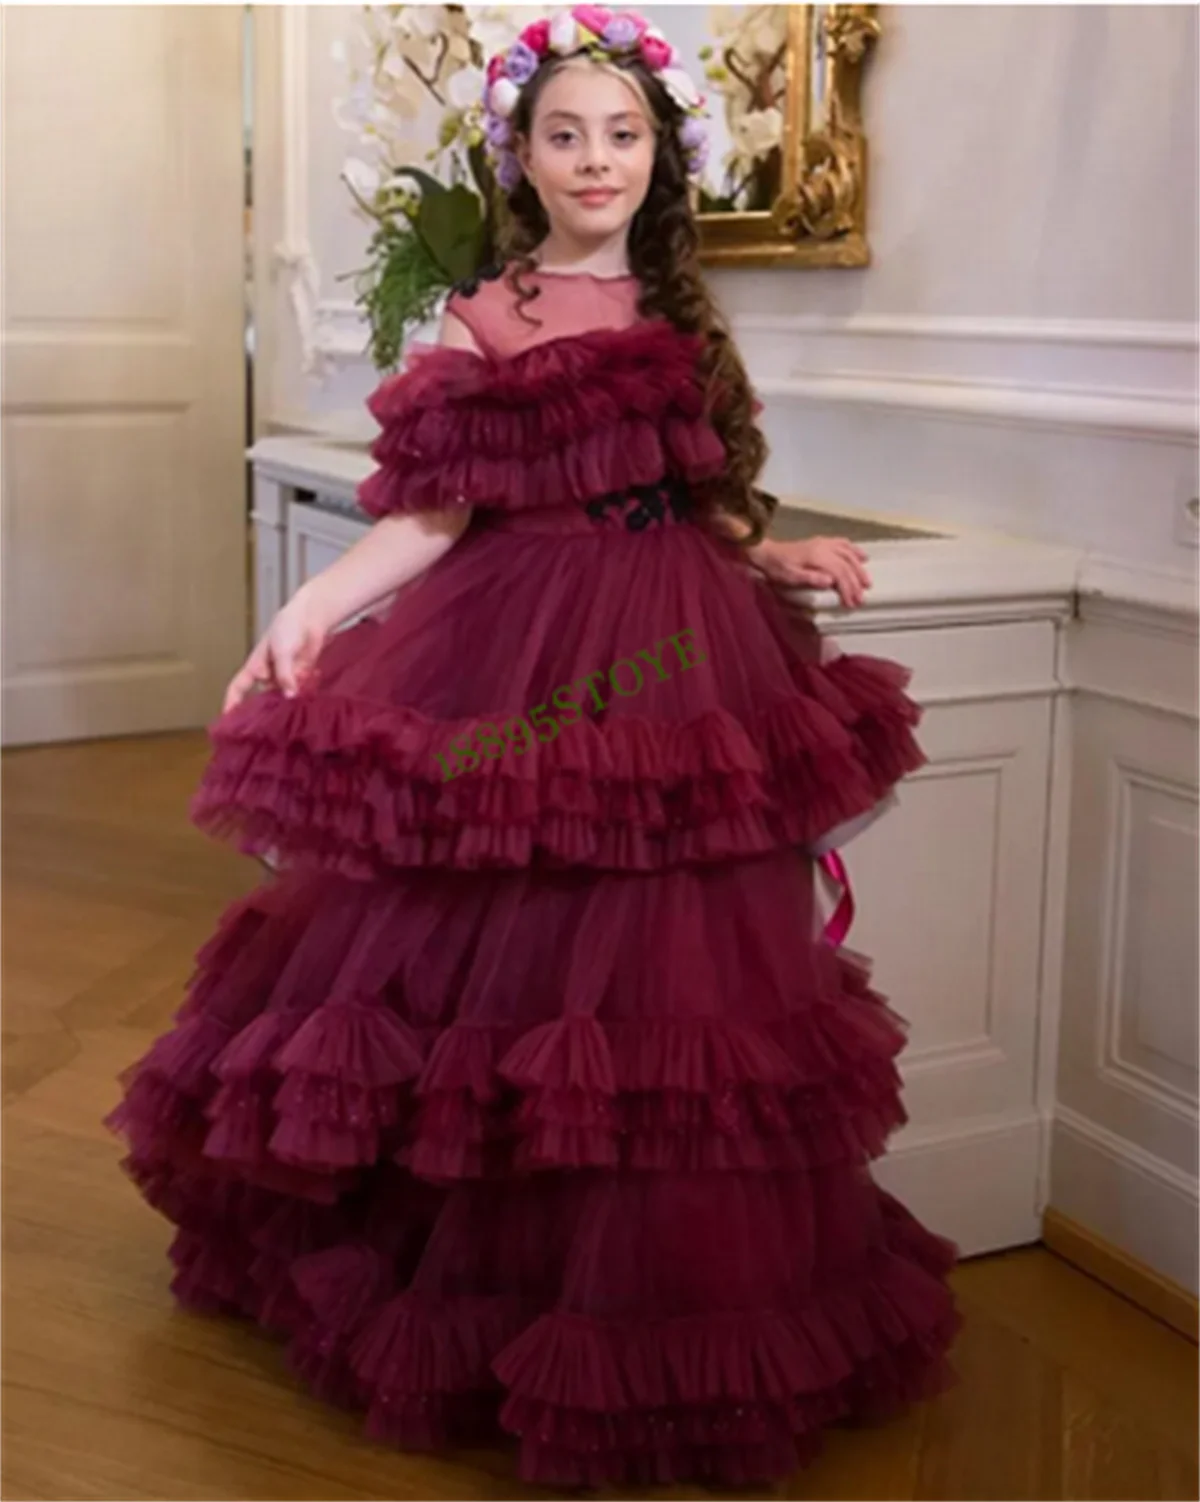 

Burgundy Tulle Girls Dresses Sheer Neck Tiered Tulle Fluffy Pageant Gown Birthday Dress Wedding Guest Special Occasion Dress